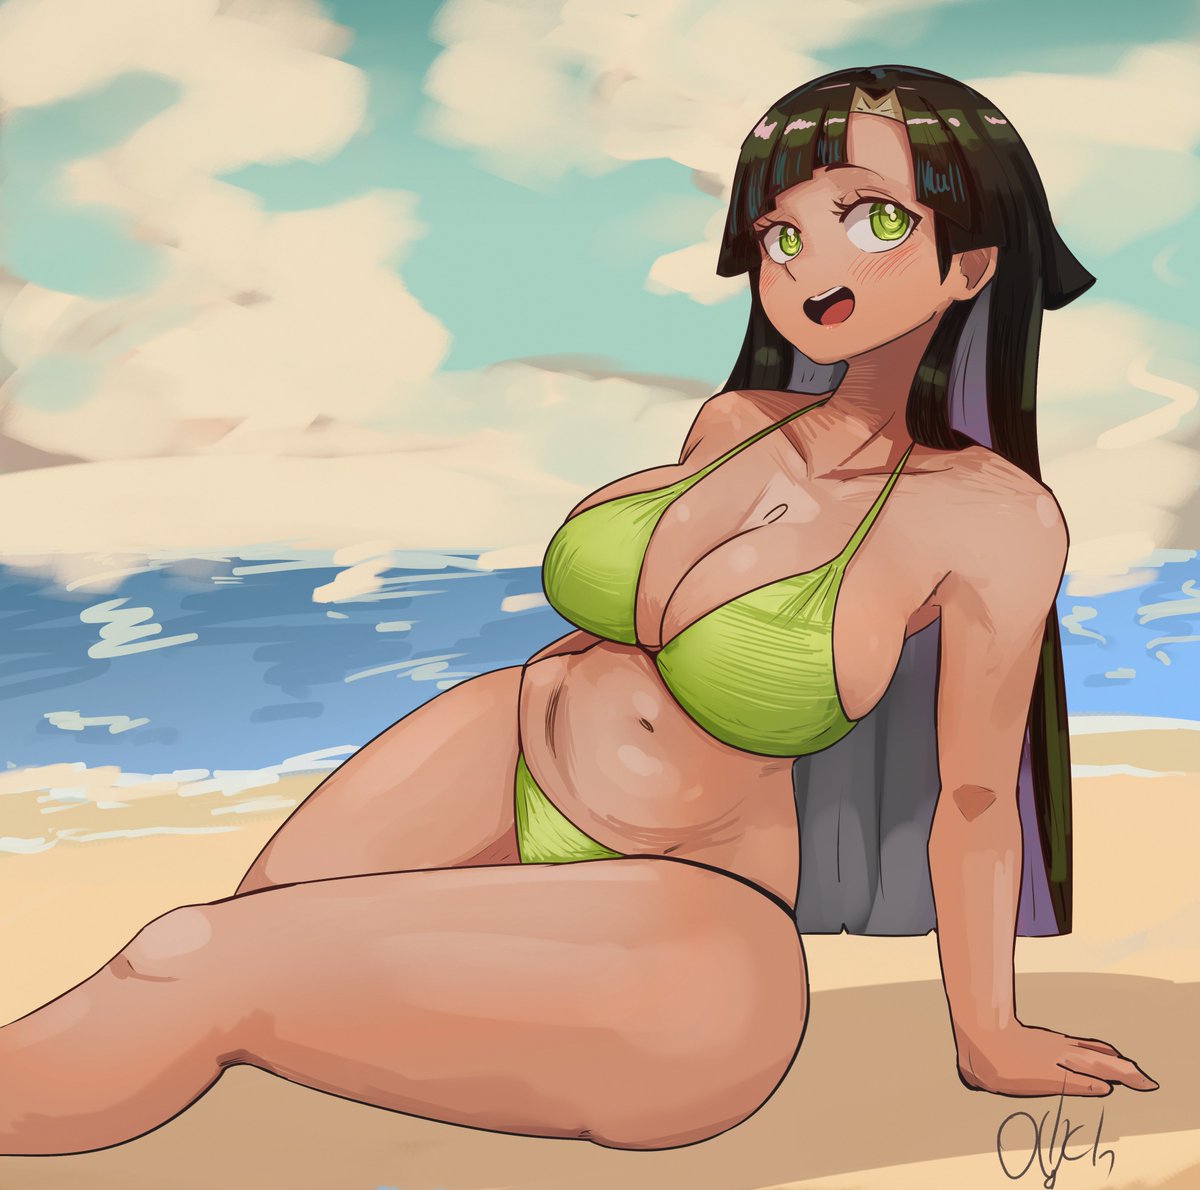 #SaraSketch the summer cometh and so I drew le snekky wekky